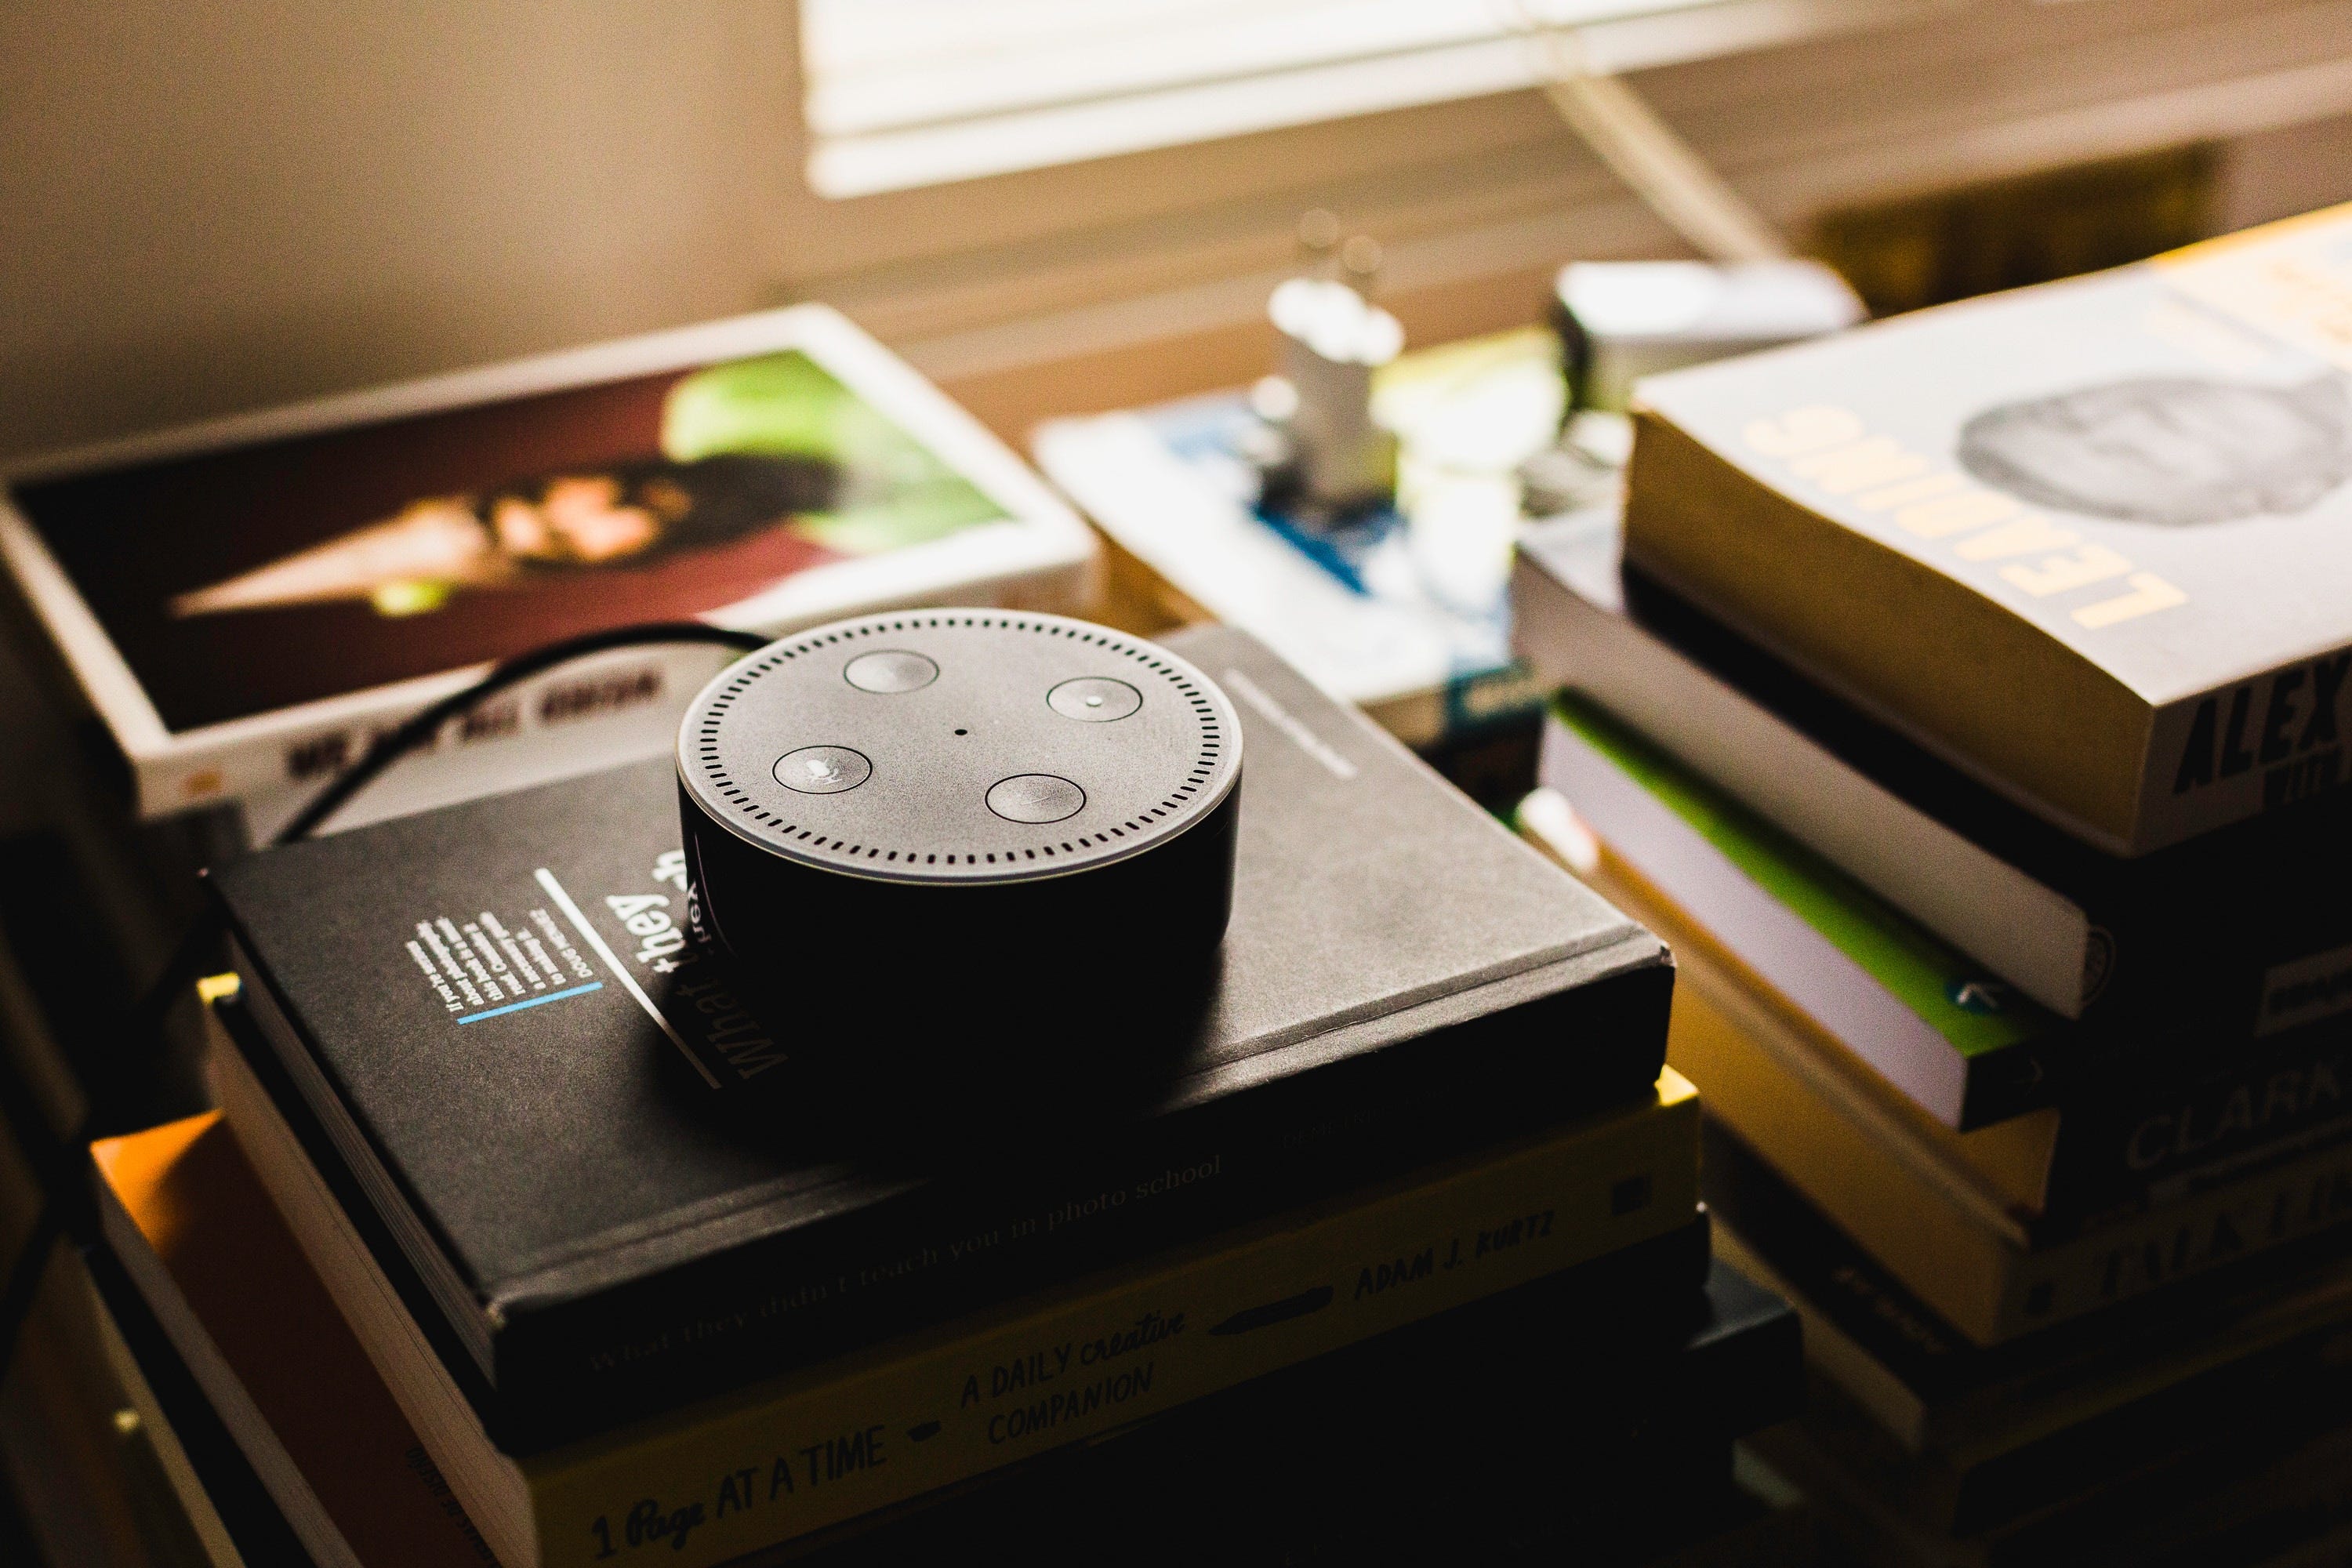 Alexa, play some music” isn't the only time Amazon is listening to you. |  by Jason T. Voiovich | The Startup | Medium